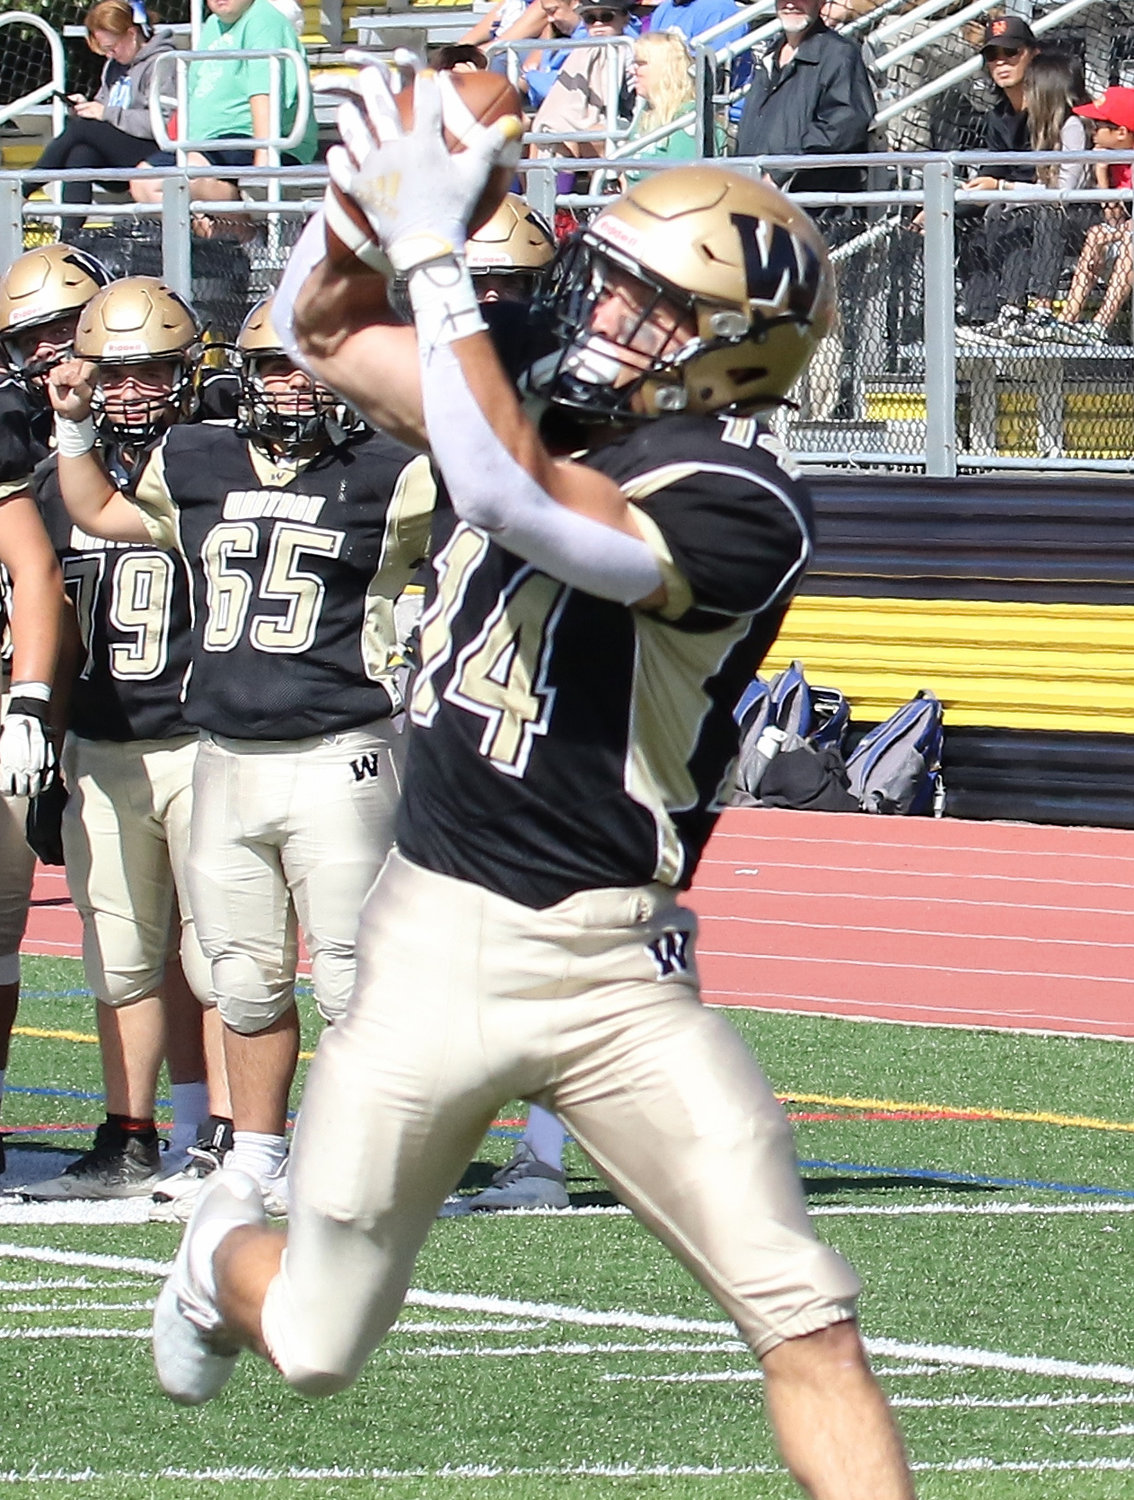 Senior Nick Cupelli caught a touchdown pass in the second quarter Saturday as Wantagh cruised past Division, 42-0.